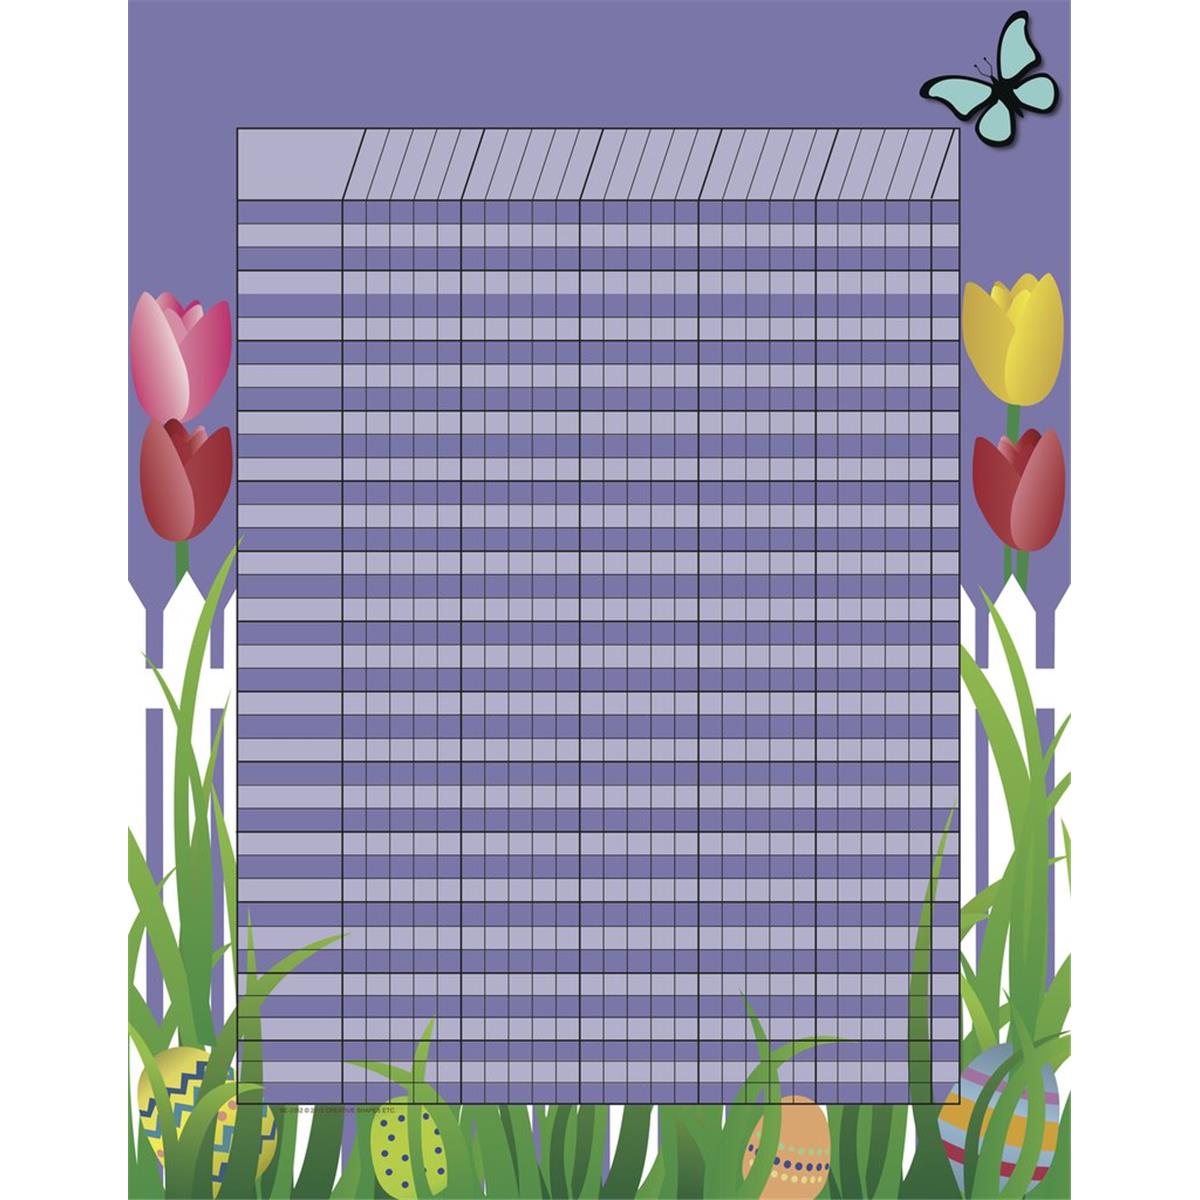 Se-3352 22 X 28 In. Vertical Chart Theme, Spring - April